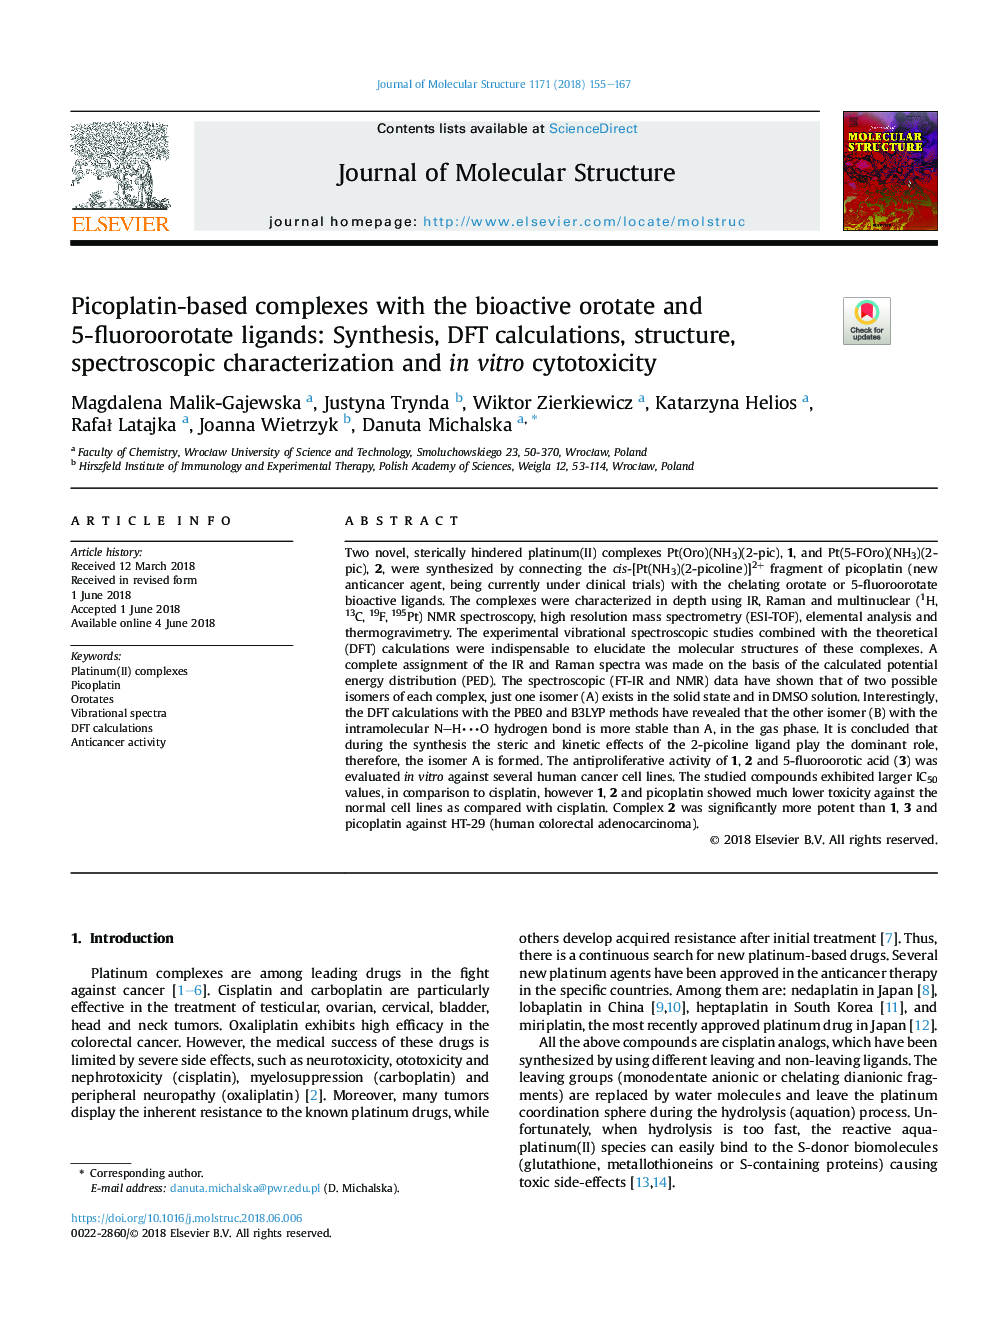 Picoplatin-based complexes with the bioactive orotate and 5-fluoroorotate ligands: Synthesis, DFT calculations, structure, spectroscopic characterization and inÂ vitro cytotoxicity